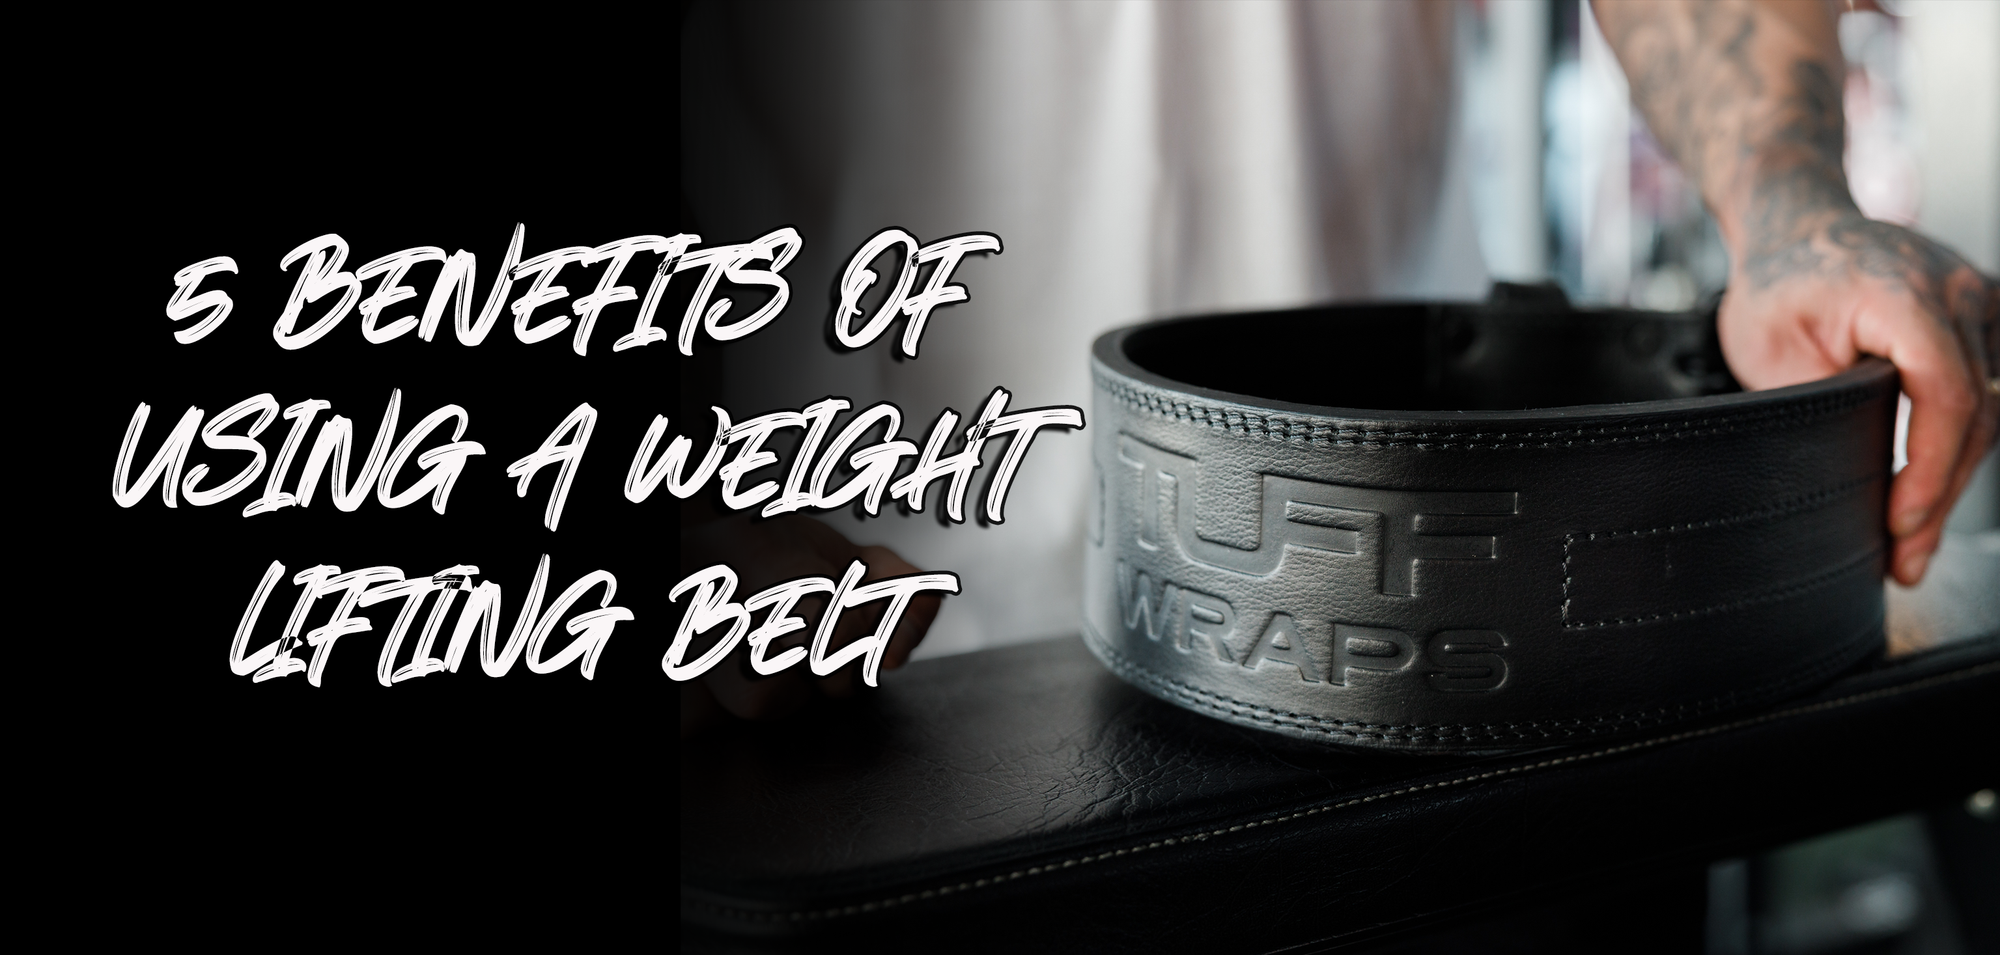 5 Benefits of Using a Weightlifting Belt